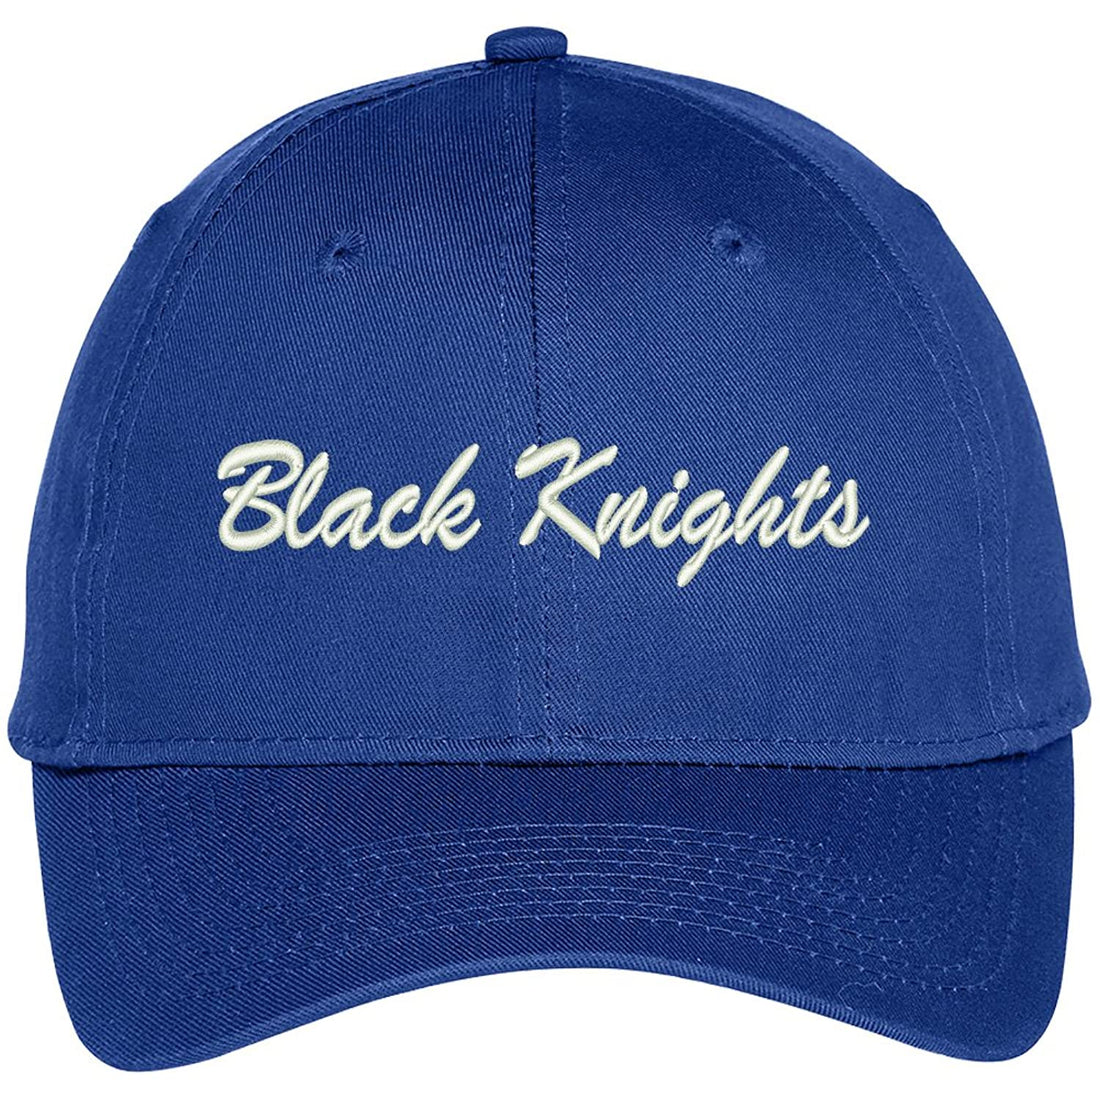 Trendy Apparel Shop Black Knights Embroidered Team Nickname Mascot Cap